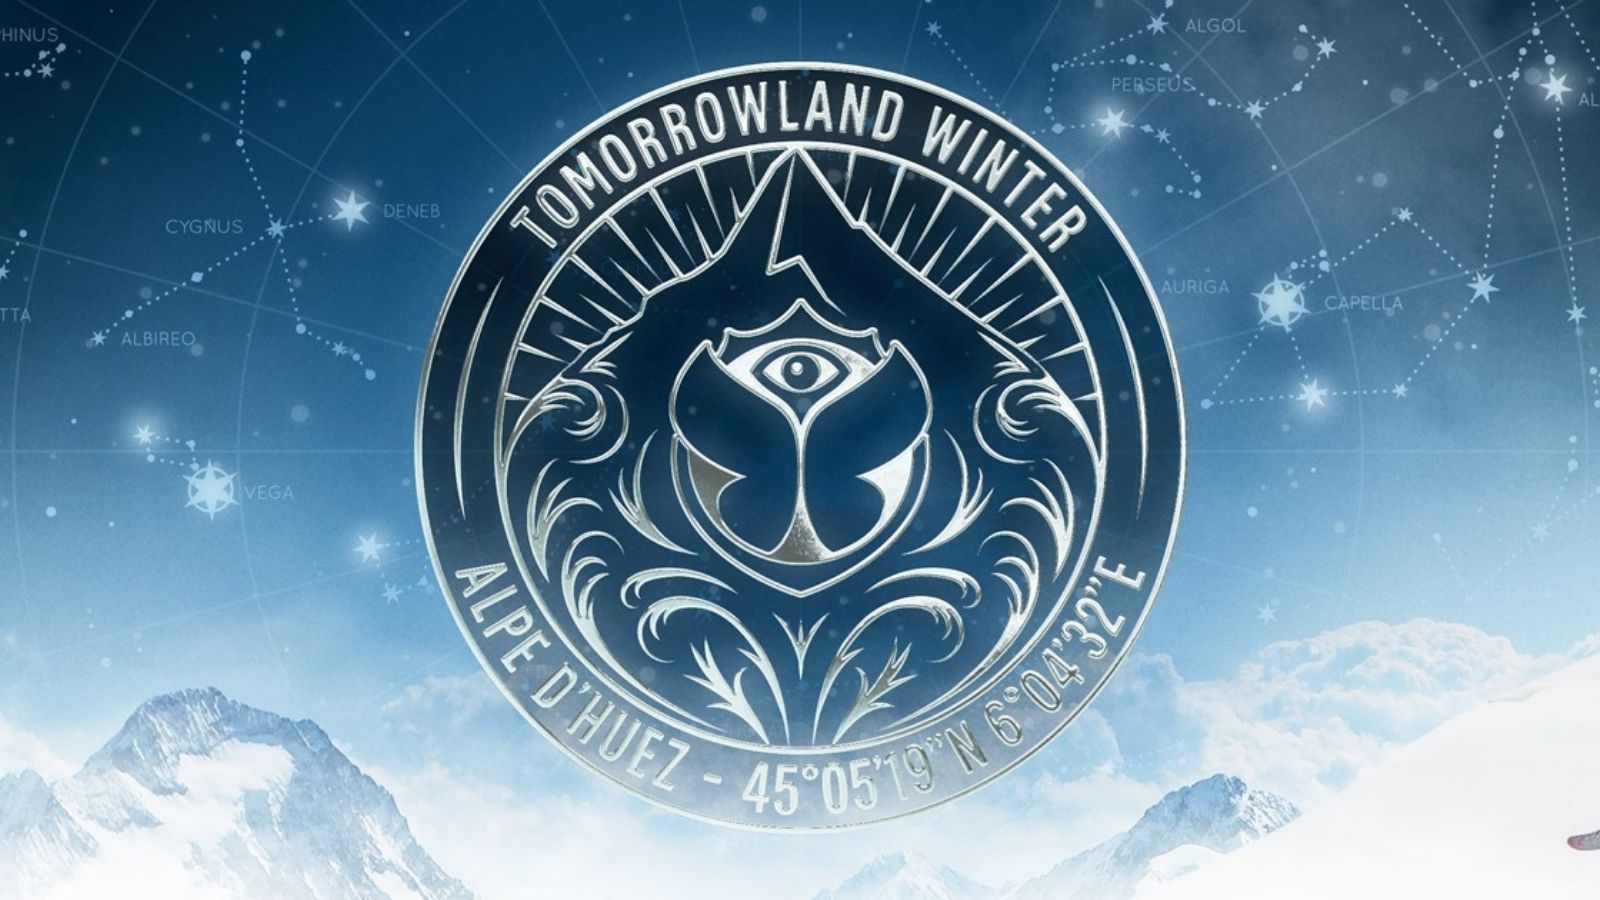 Tomorrowland Winter announces line up for 2022